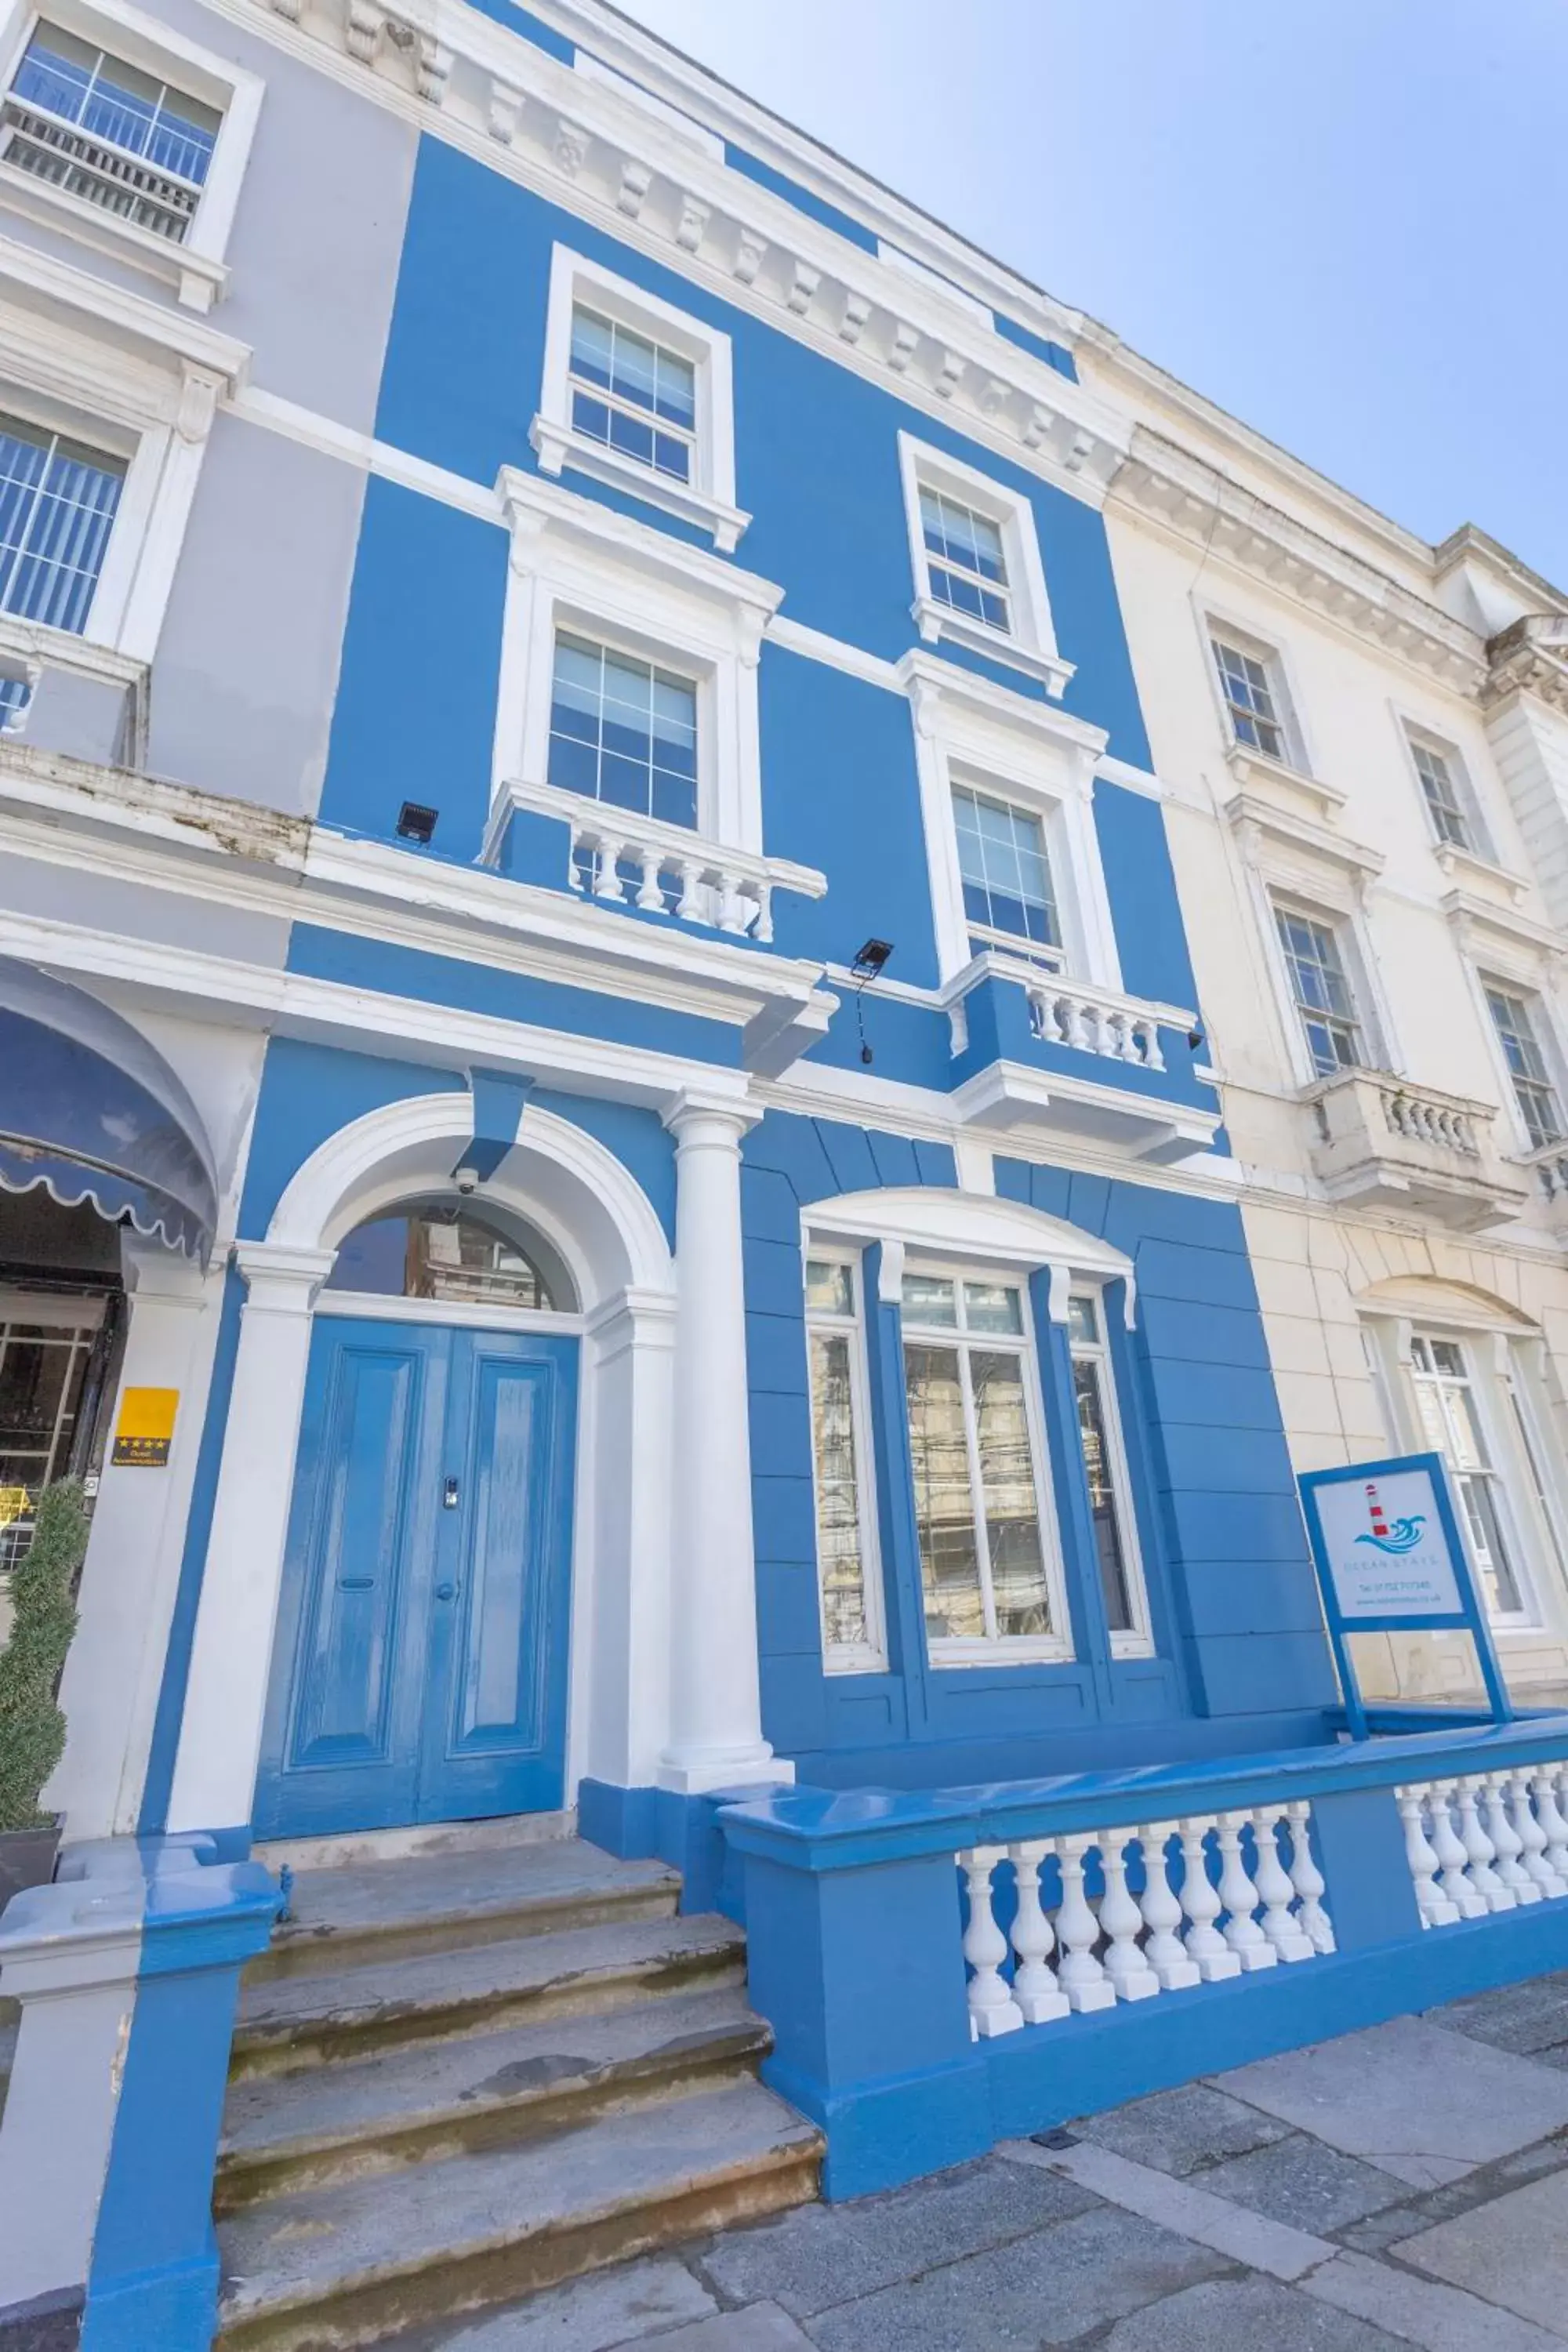 Property building in Ocean Stays Hotel, Plymouth